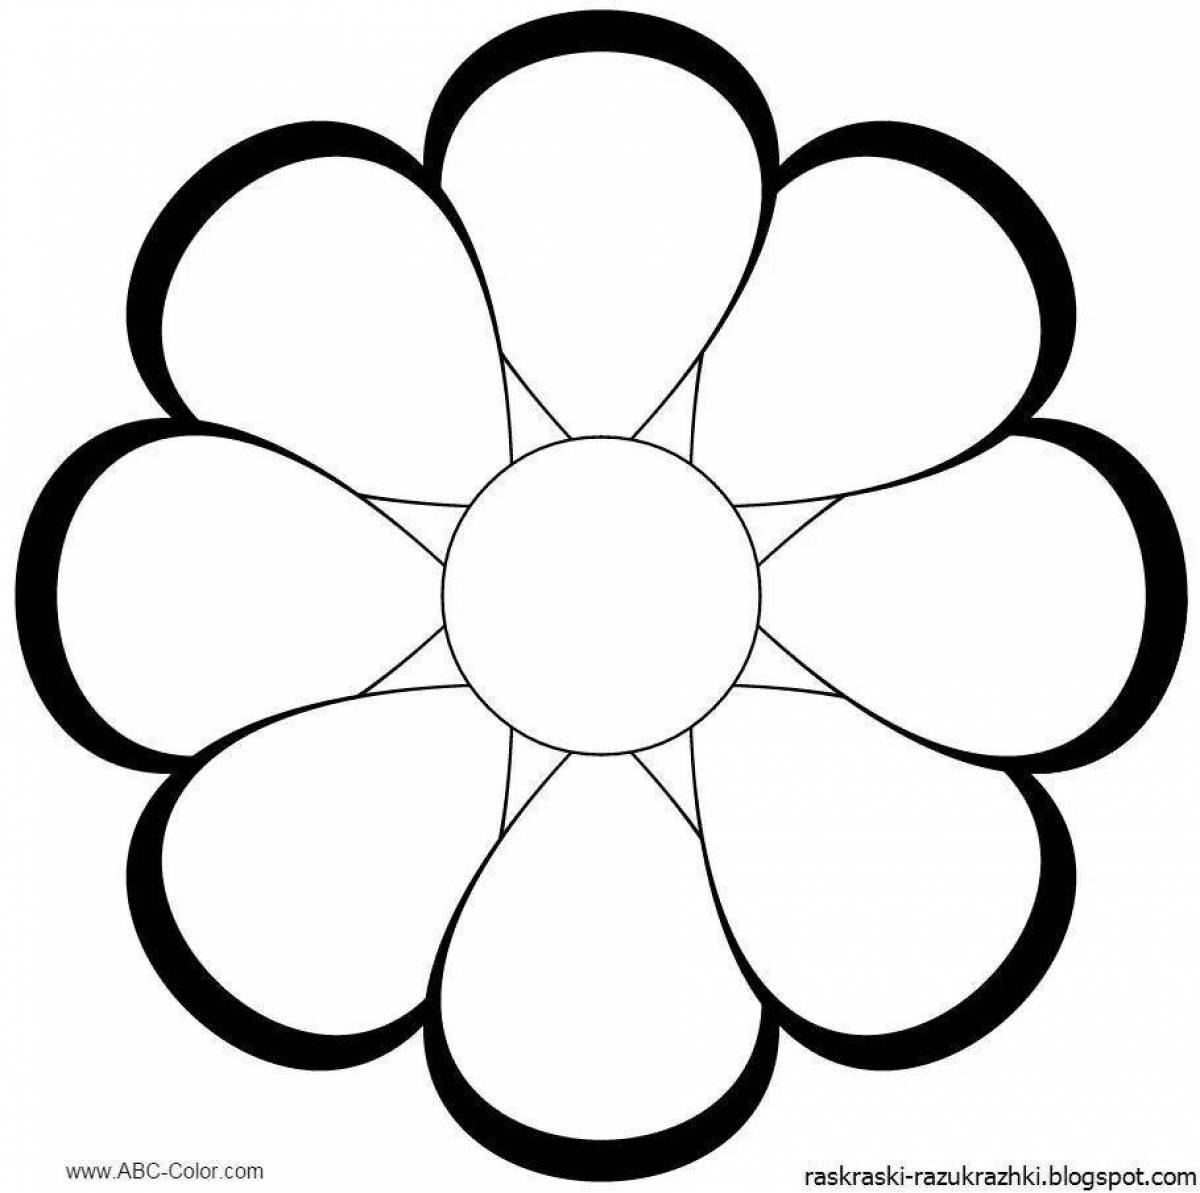 Adorable coloring book flower template with seven colors